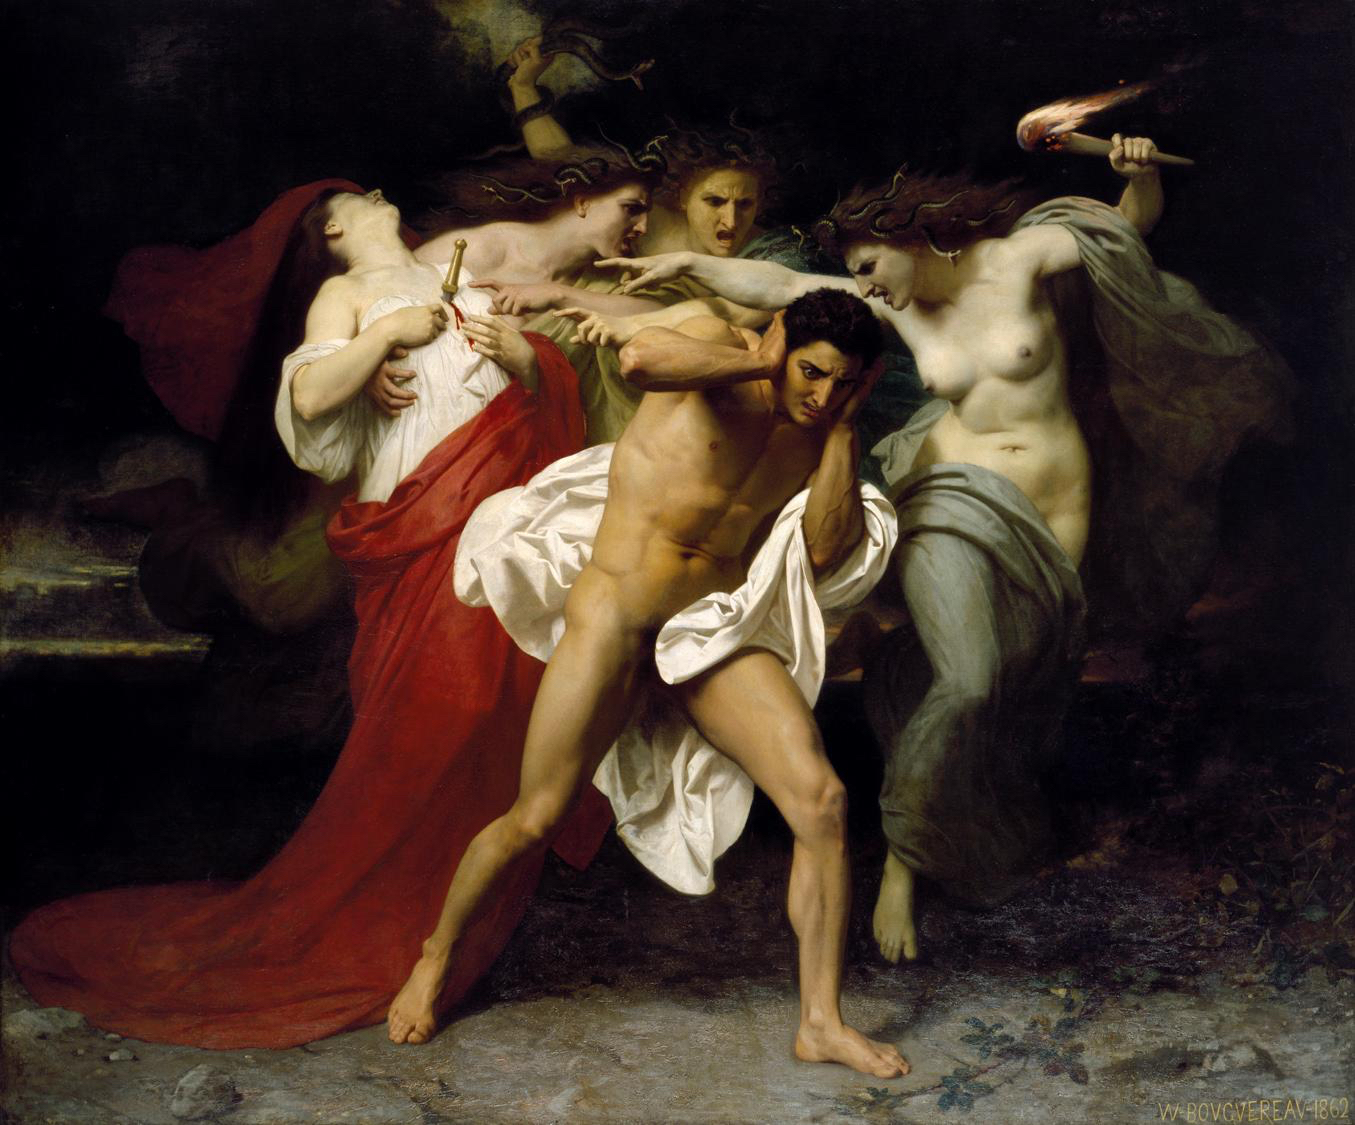 William-Adolphe Bouguereau, Orestes Pursued by the Furies, 1862